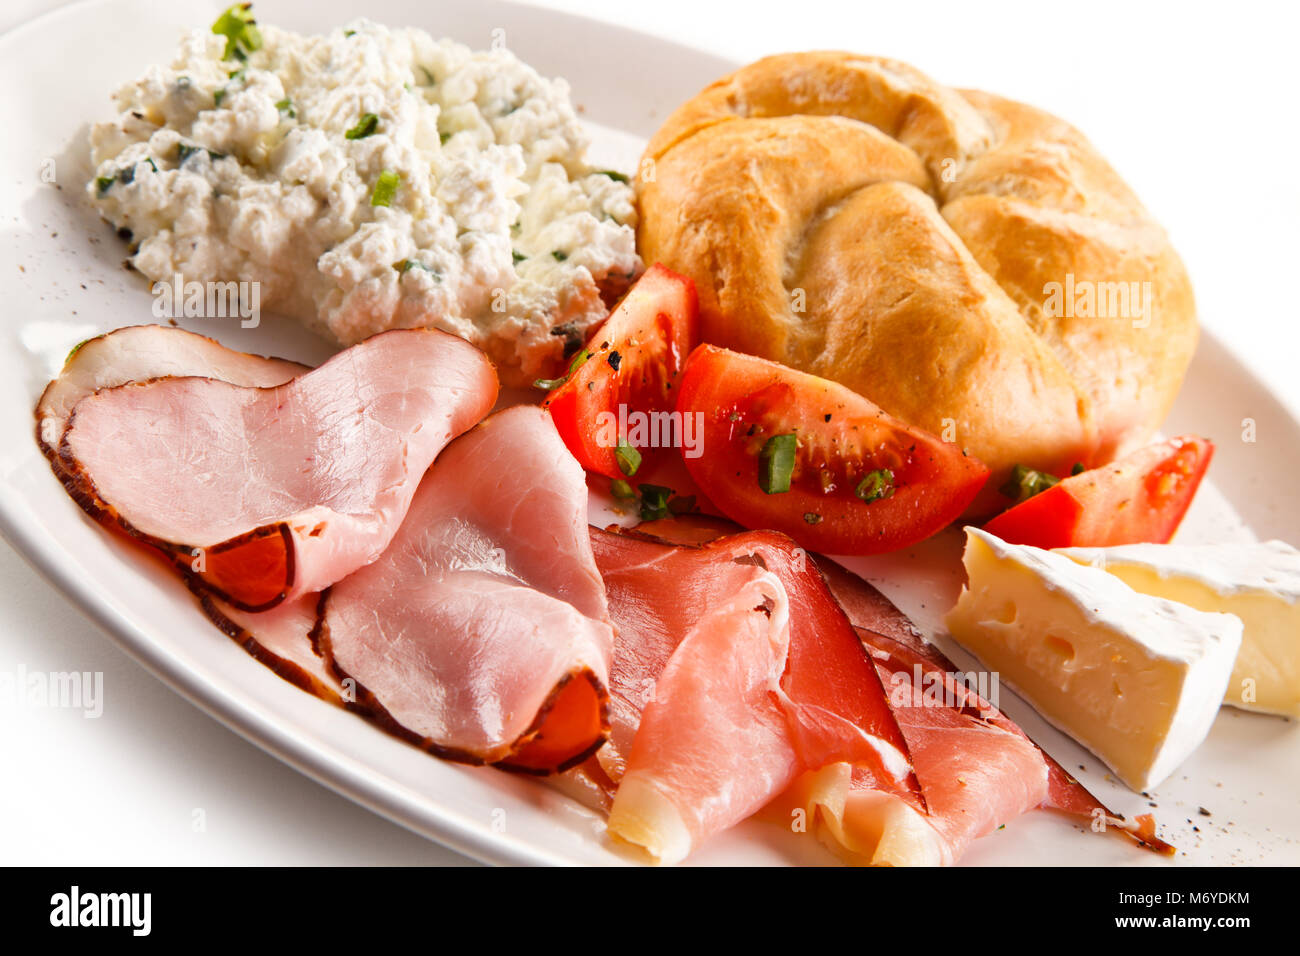 Breakfast - bacon, cottage cheese and vegetables Stock Photo